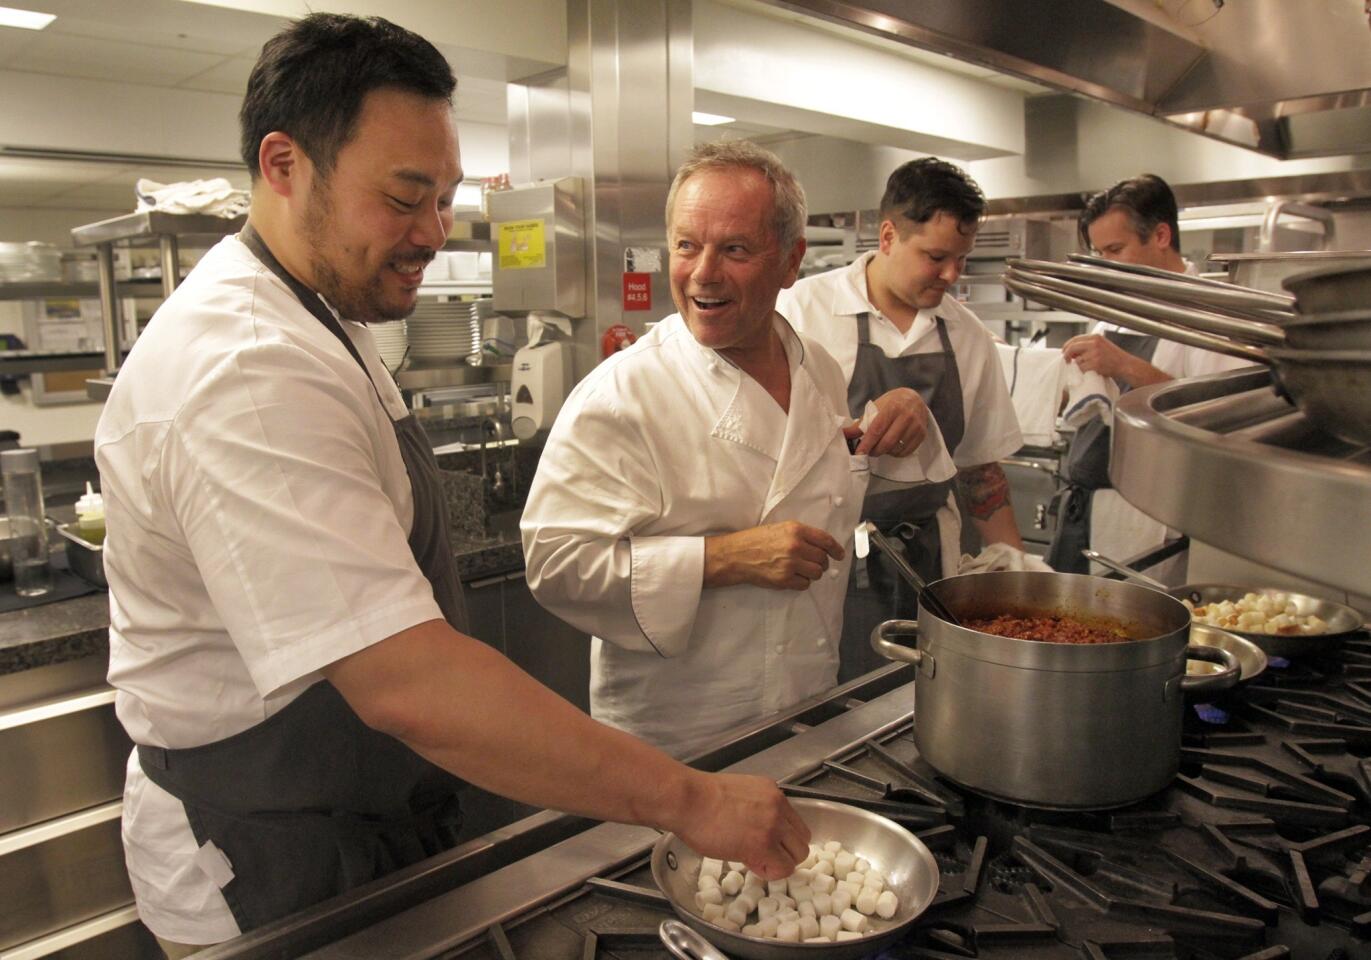 Chefs David Chang, left, and Wolfgang Puck in the kitchen at the Hotel Bel-Air in Beverly Hills.